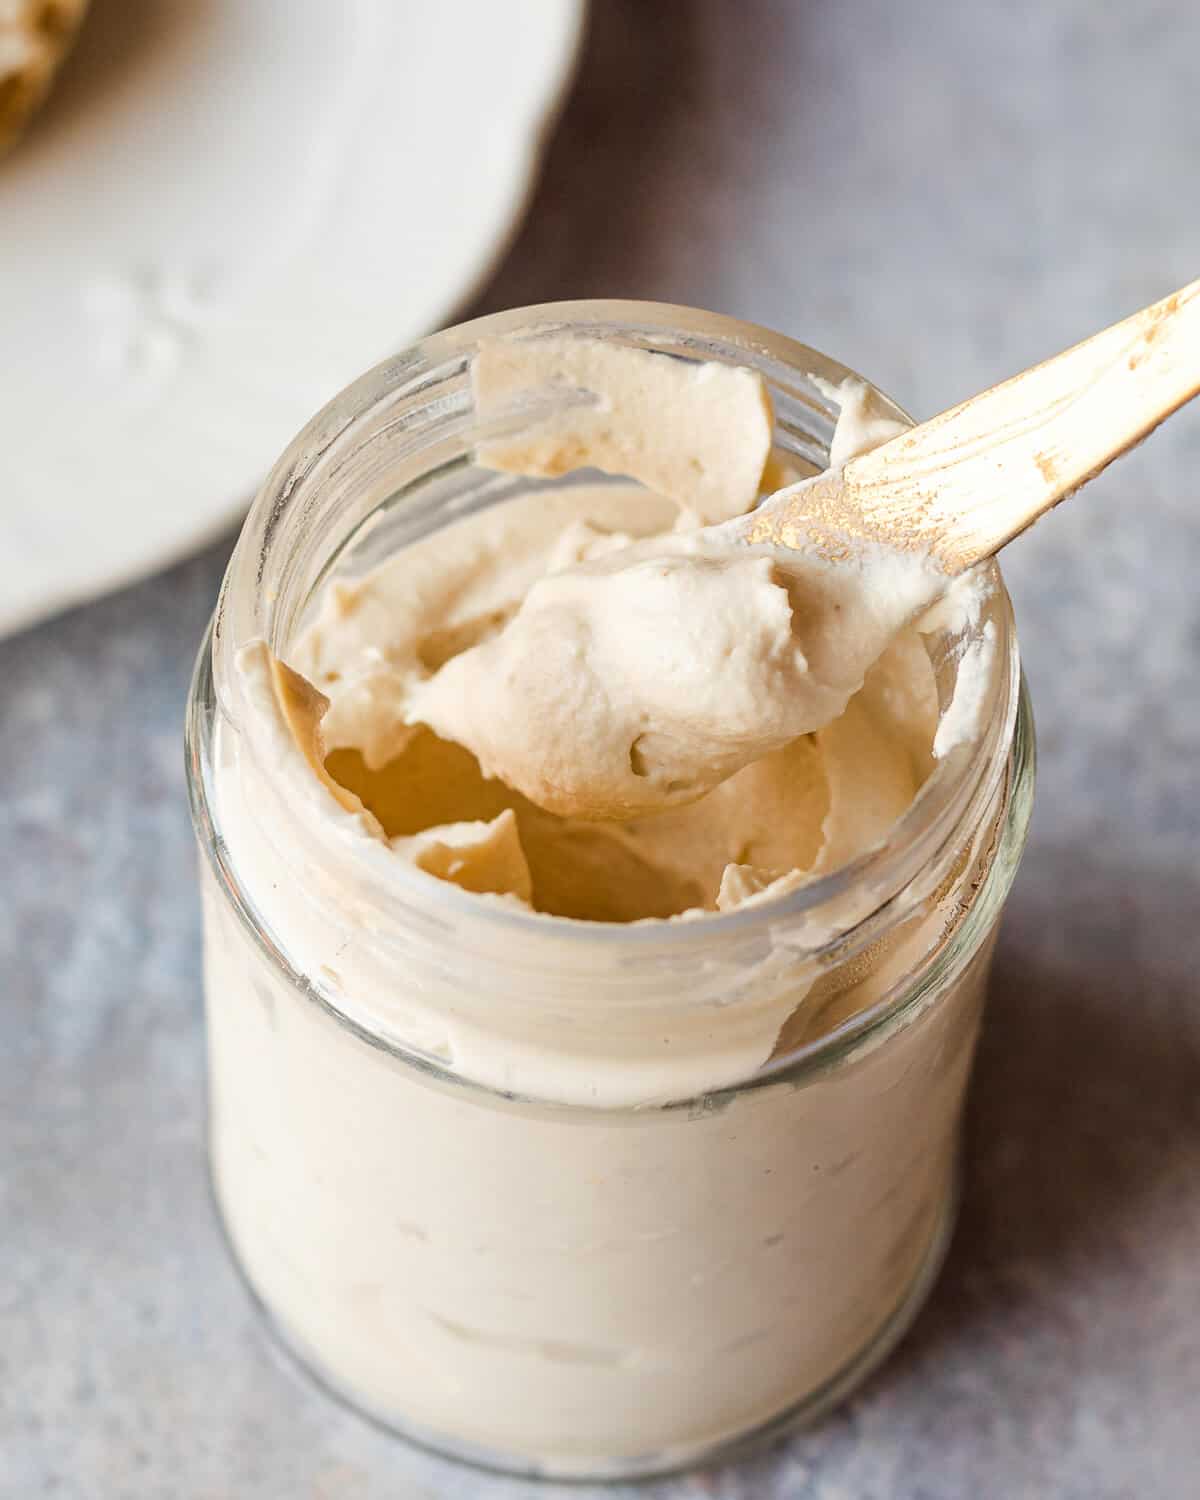 A jar of vegan cream cheese. There is a knife coming out of the jar with some cream cheese on it. There is a plate in the background.